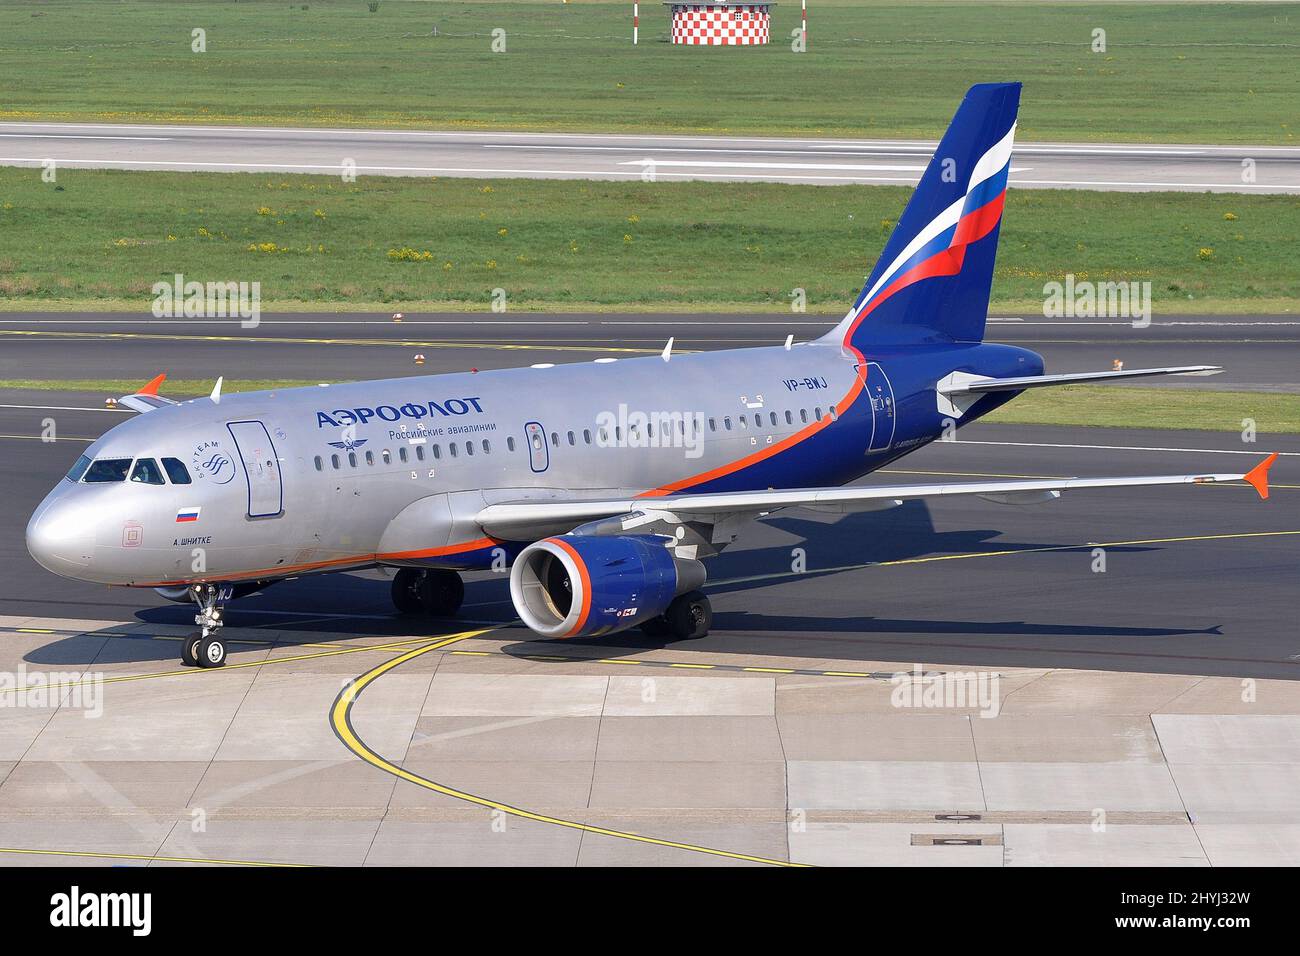 AEROFLOT AIRBUS A319 HAS BERMUDAN REGISTRATION CANCELLED BY LEASING COMPANY DUE TO RUSSIAN INVASION OF UKRAINE IN 2022. Stock Photo